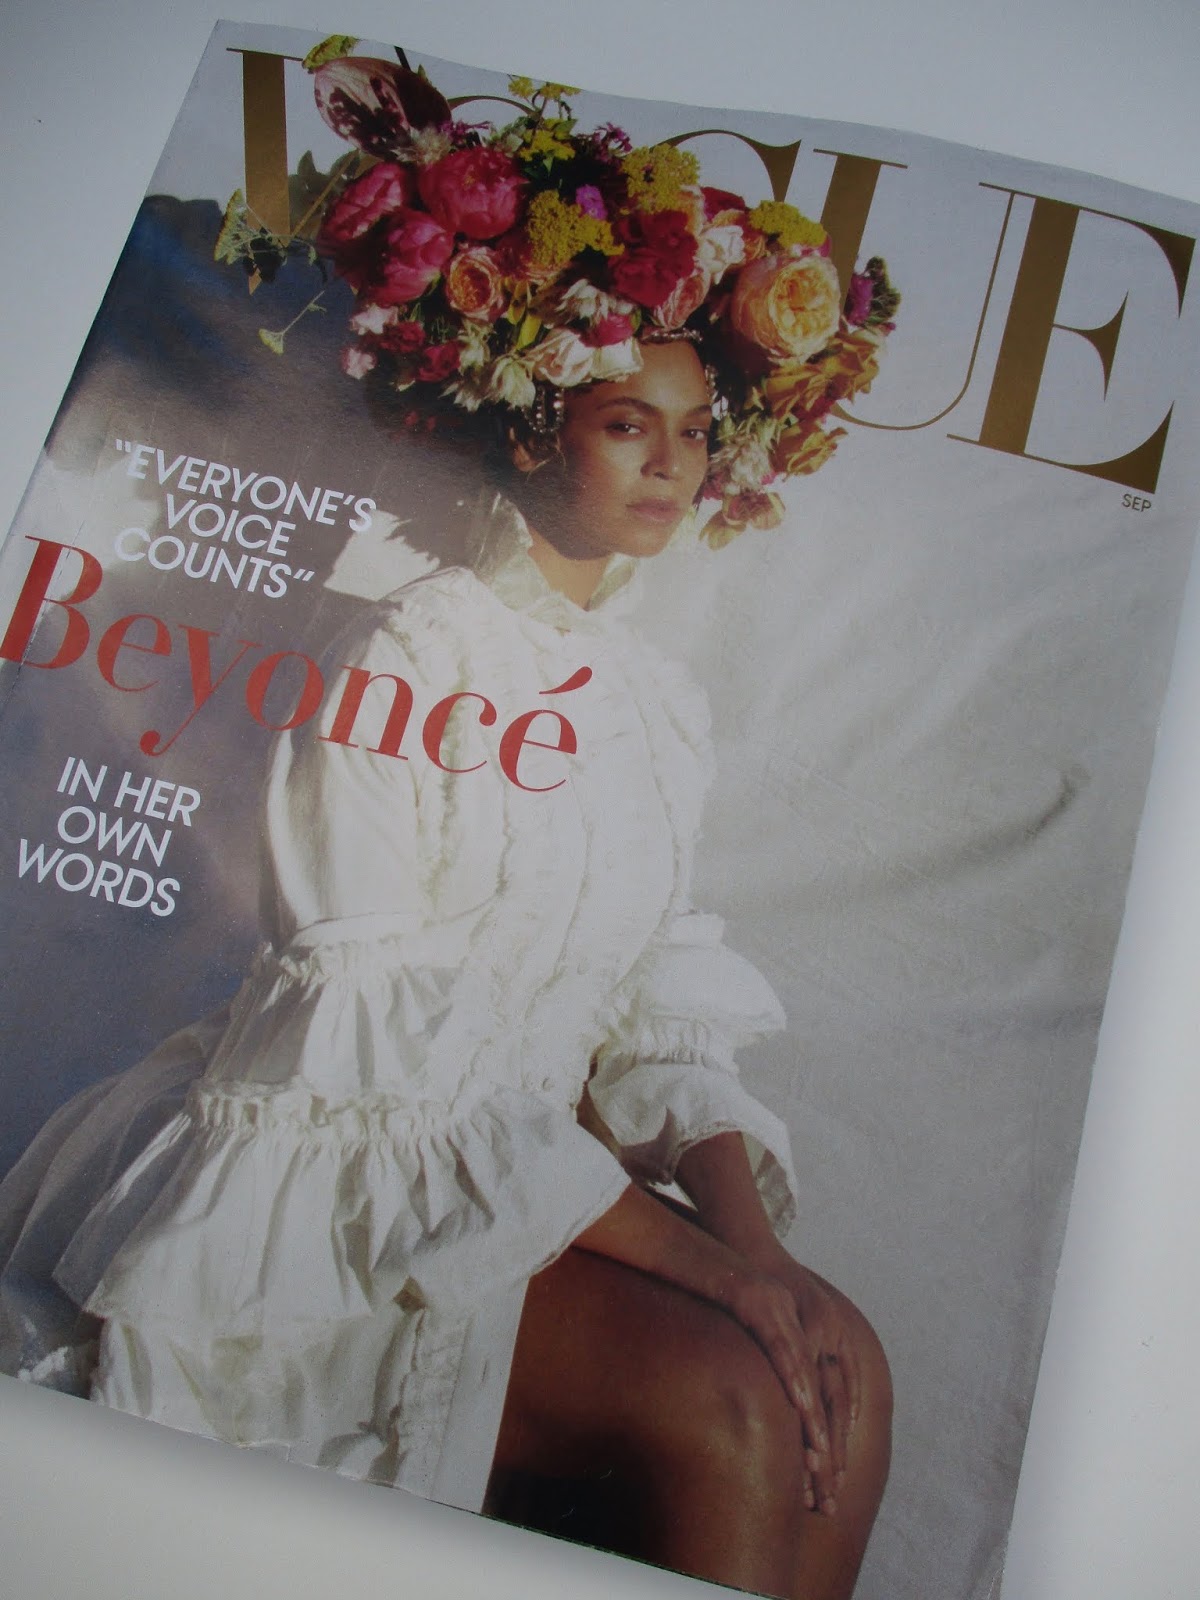 Tea With Friends: The famous September issue of Vogue